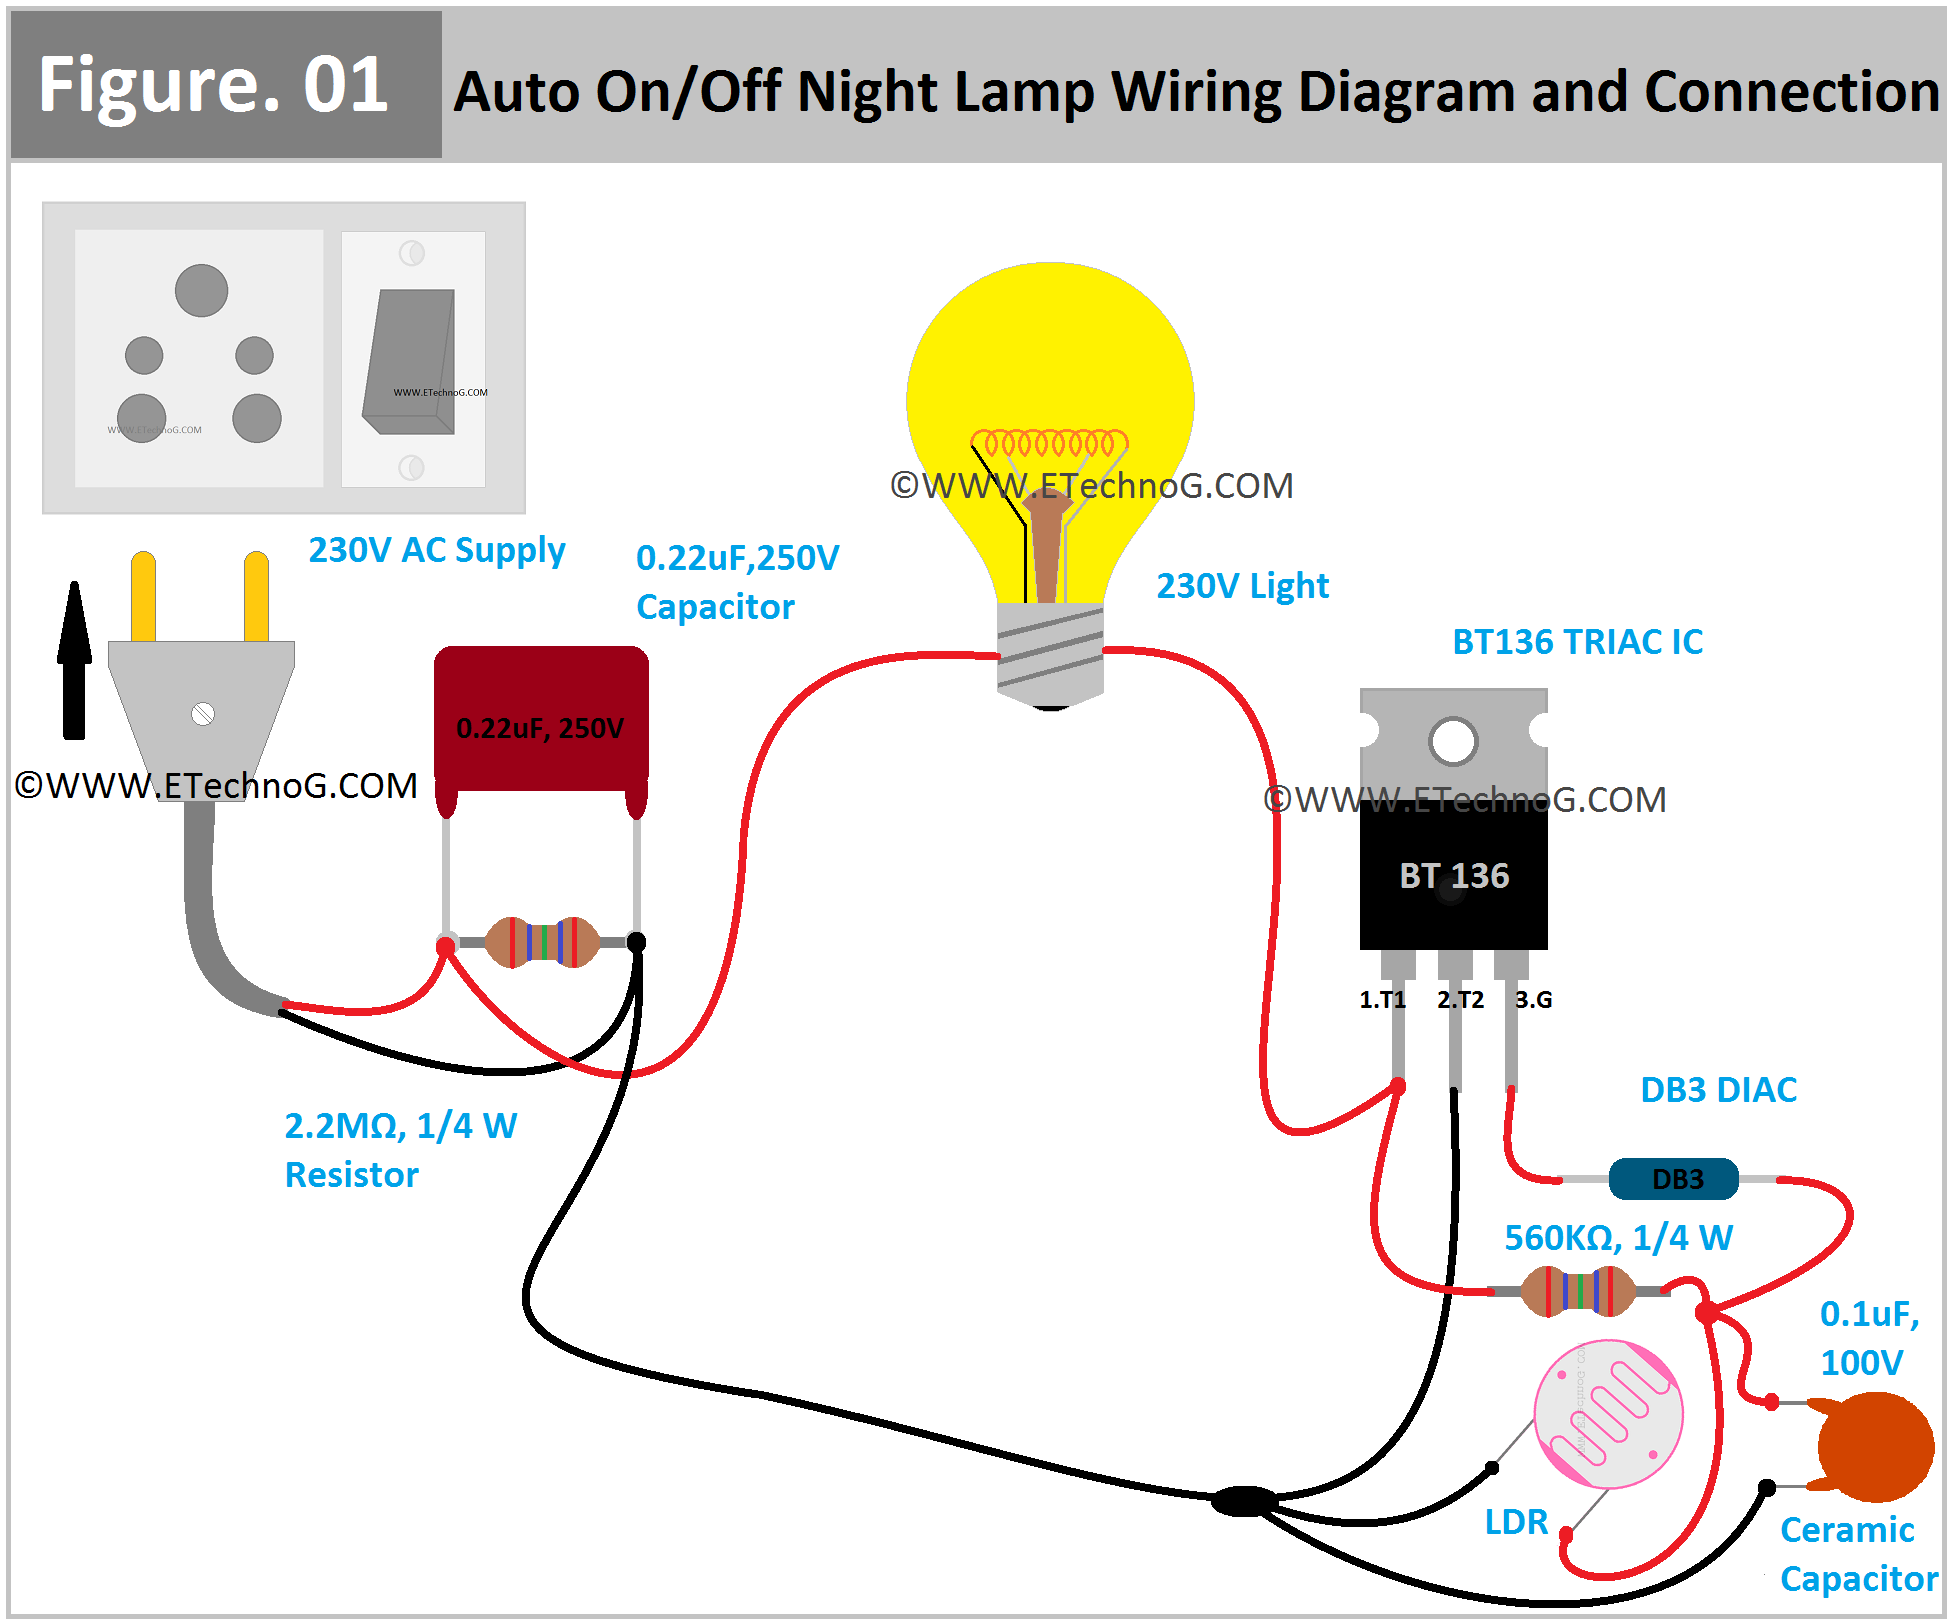 auto on off night lamp(230V) wiring diagram and connection, Circuit